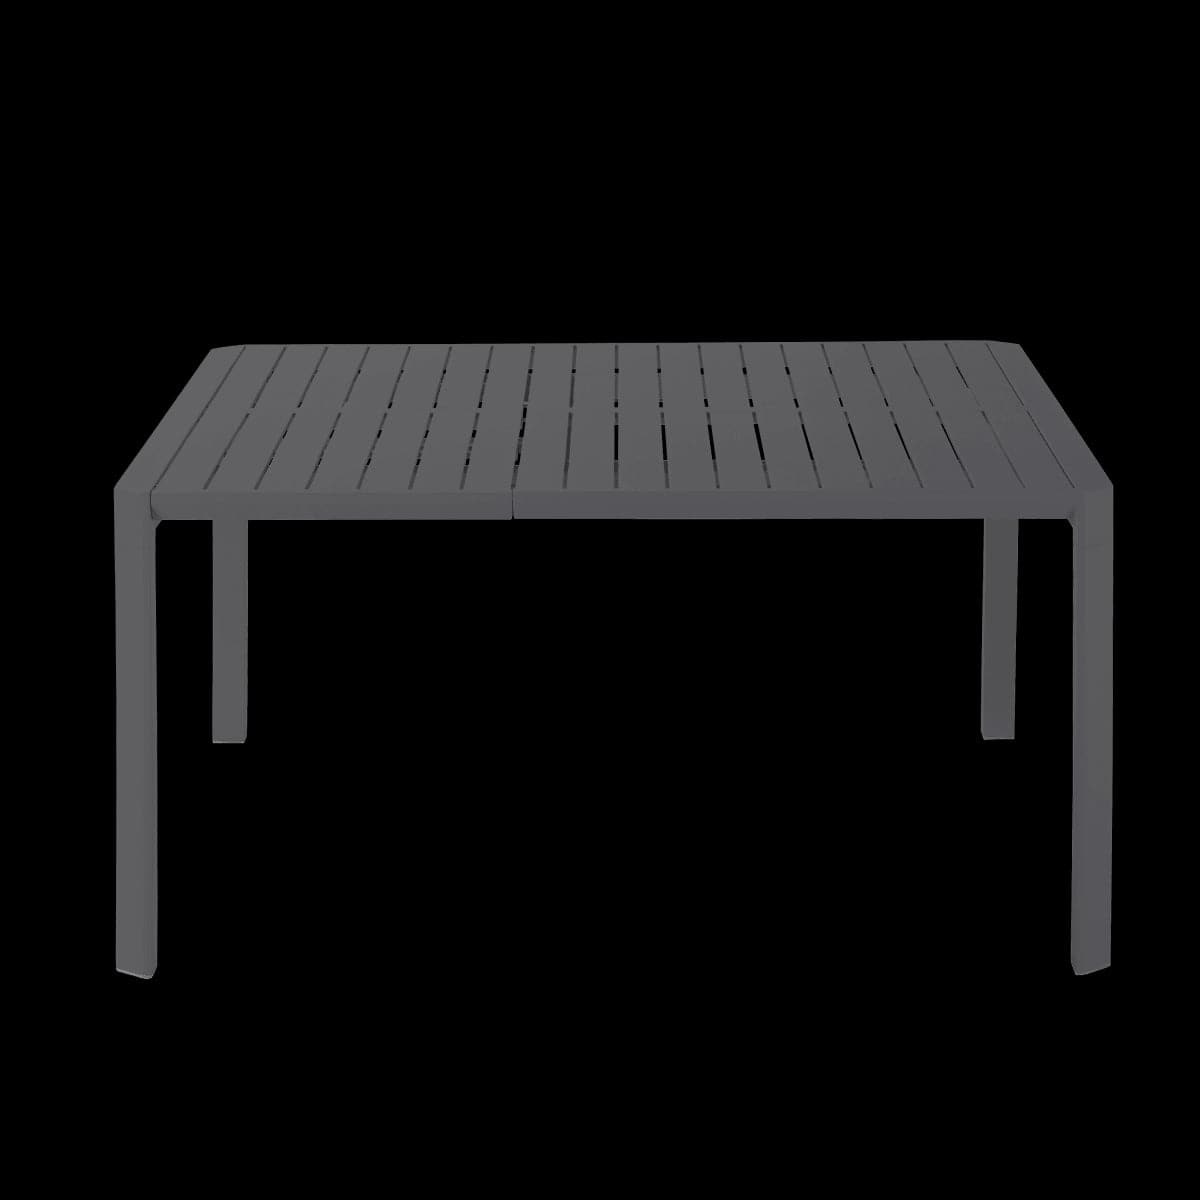 IDAHO EXTENSION TABLE 180/240X100 ANTHRACITE - best price from Maltashopper.com BR500015320